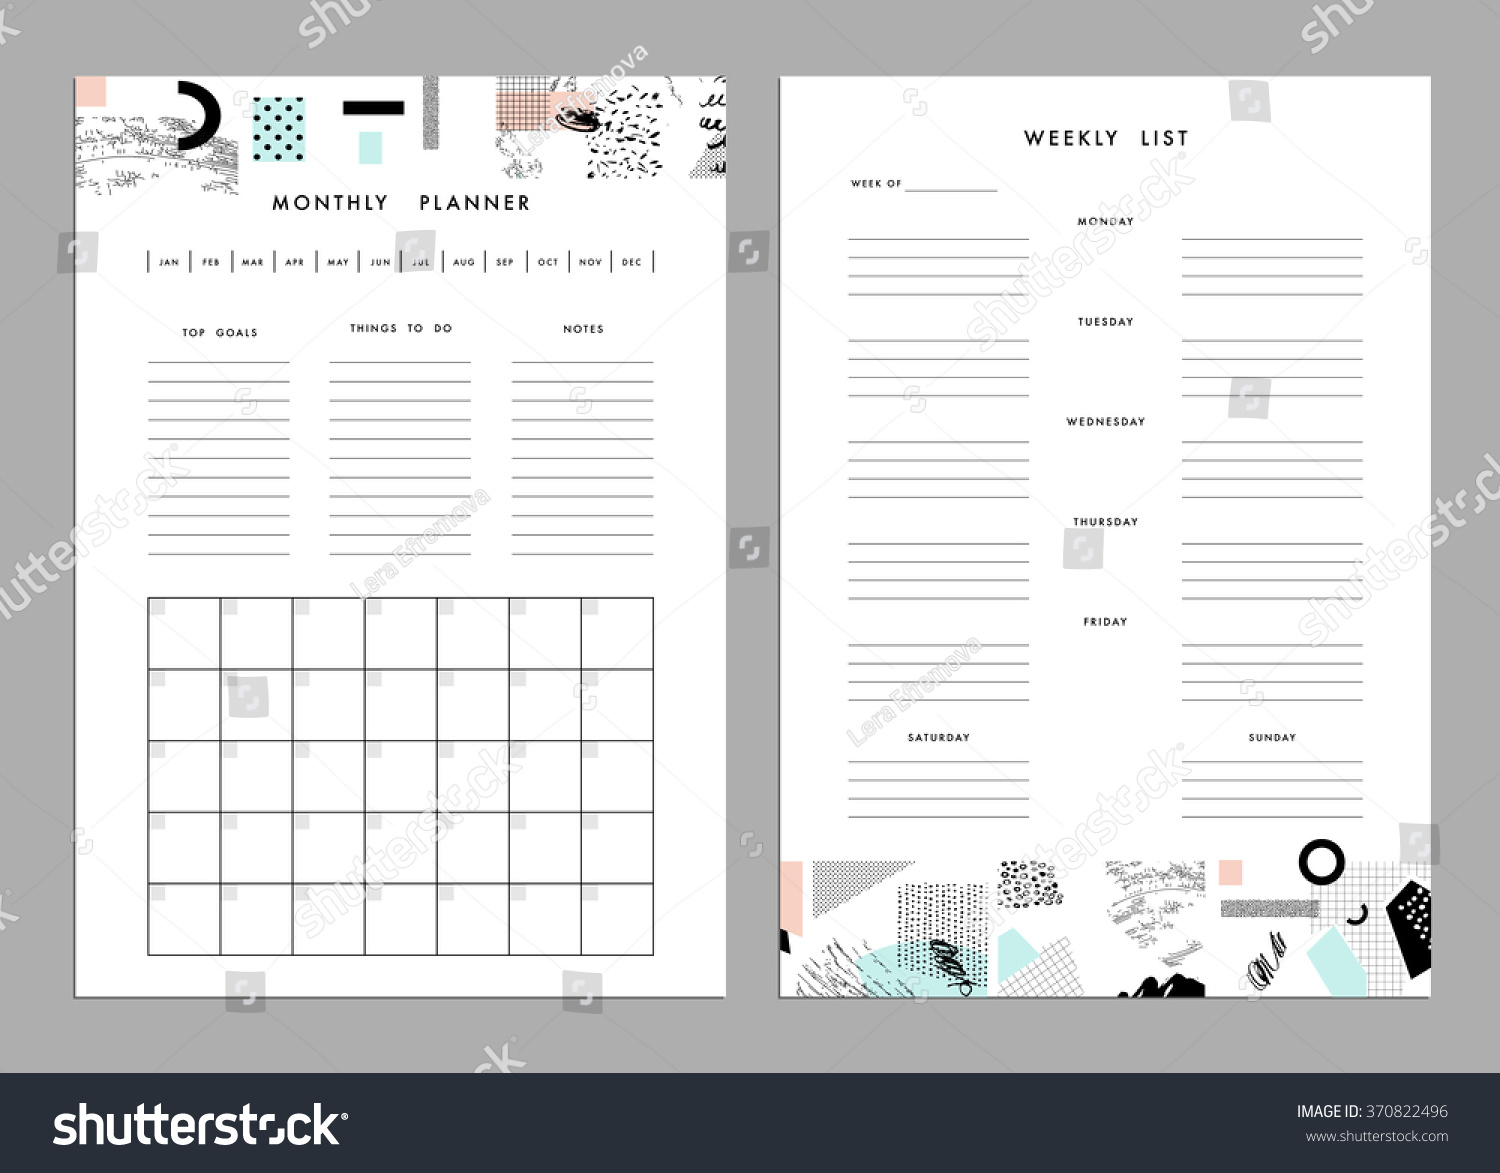 Monthly Planner Plus Weekly List Templates Stock Vector For Notes Plus Templates